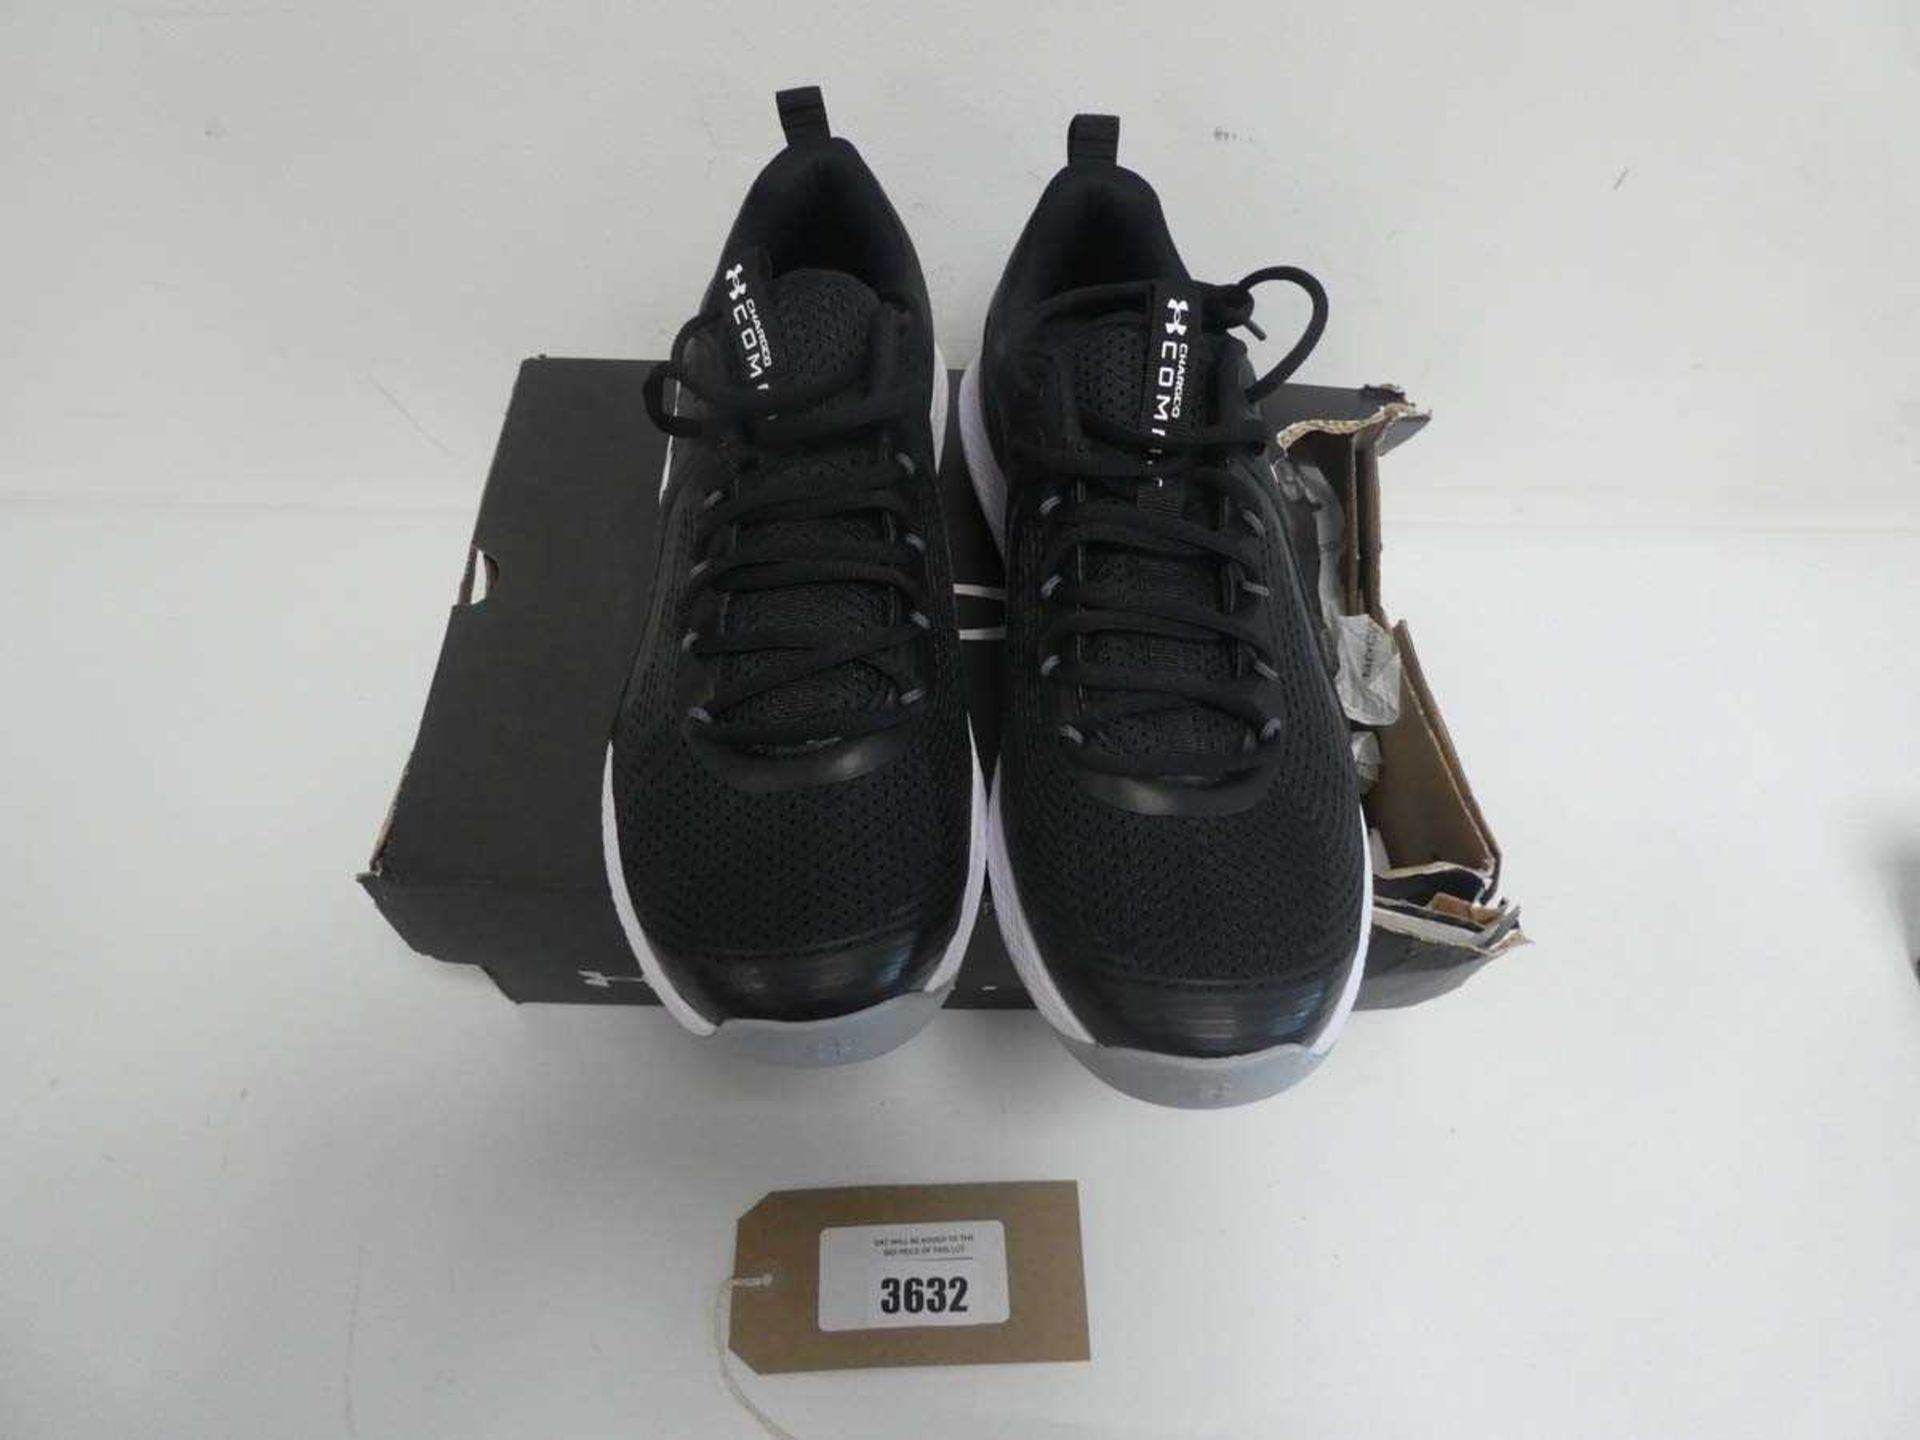 +VAT Under Armour trainers in black/white size UK9 (damaged box)